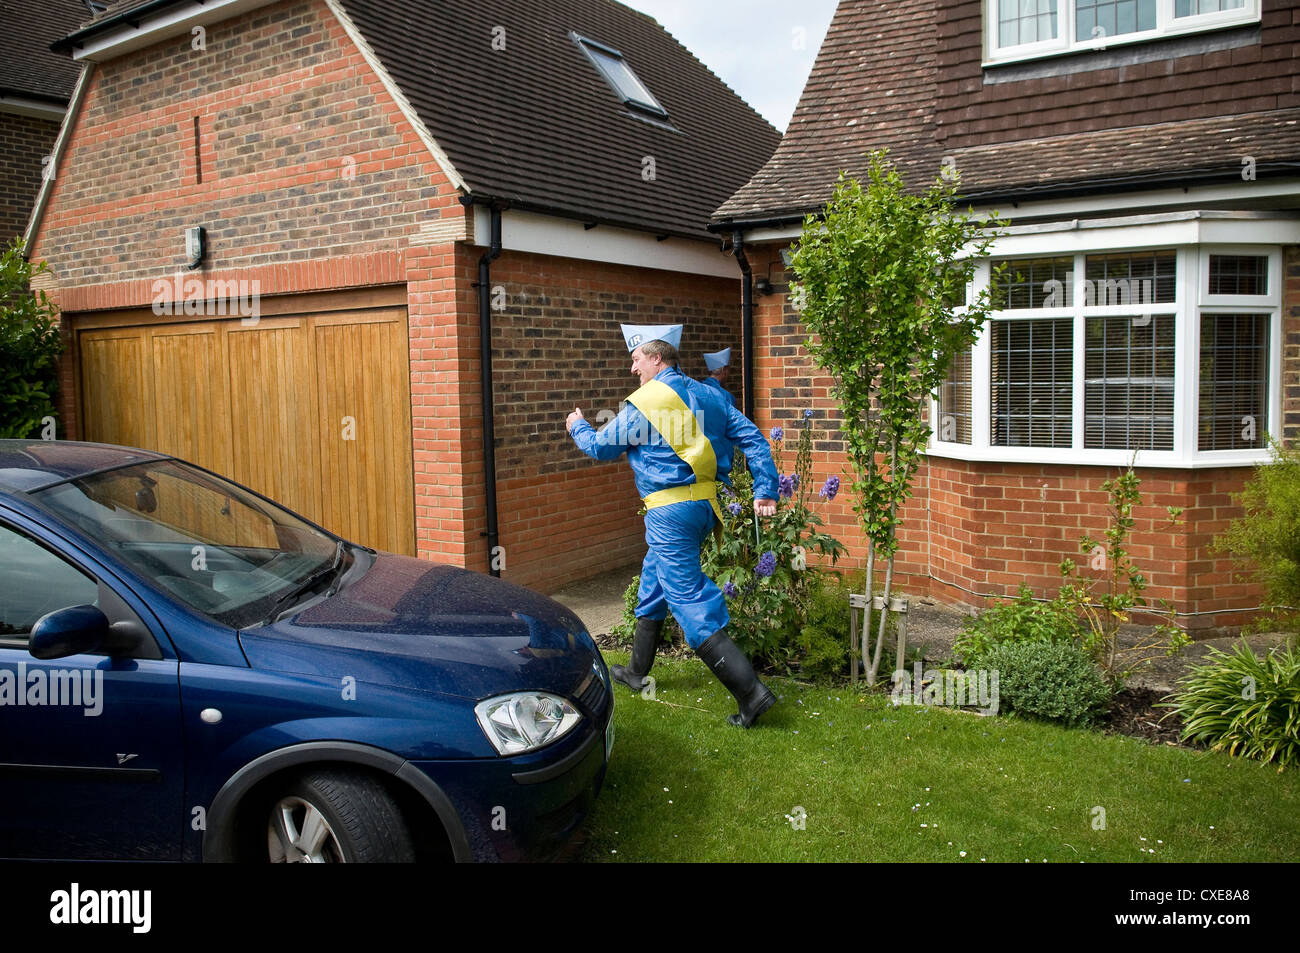 Two Middle-aged men dressed as Thunderbirds puppets in suburbia Stock Photo